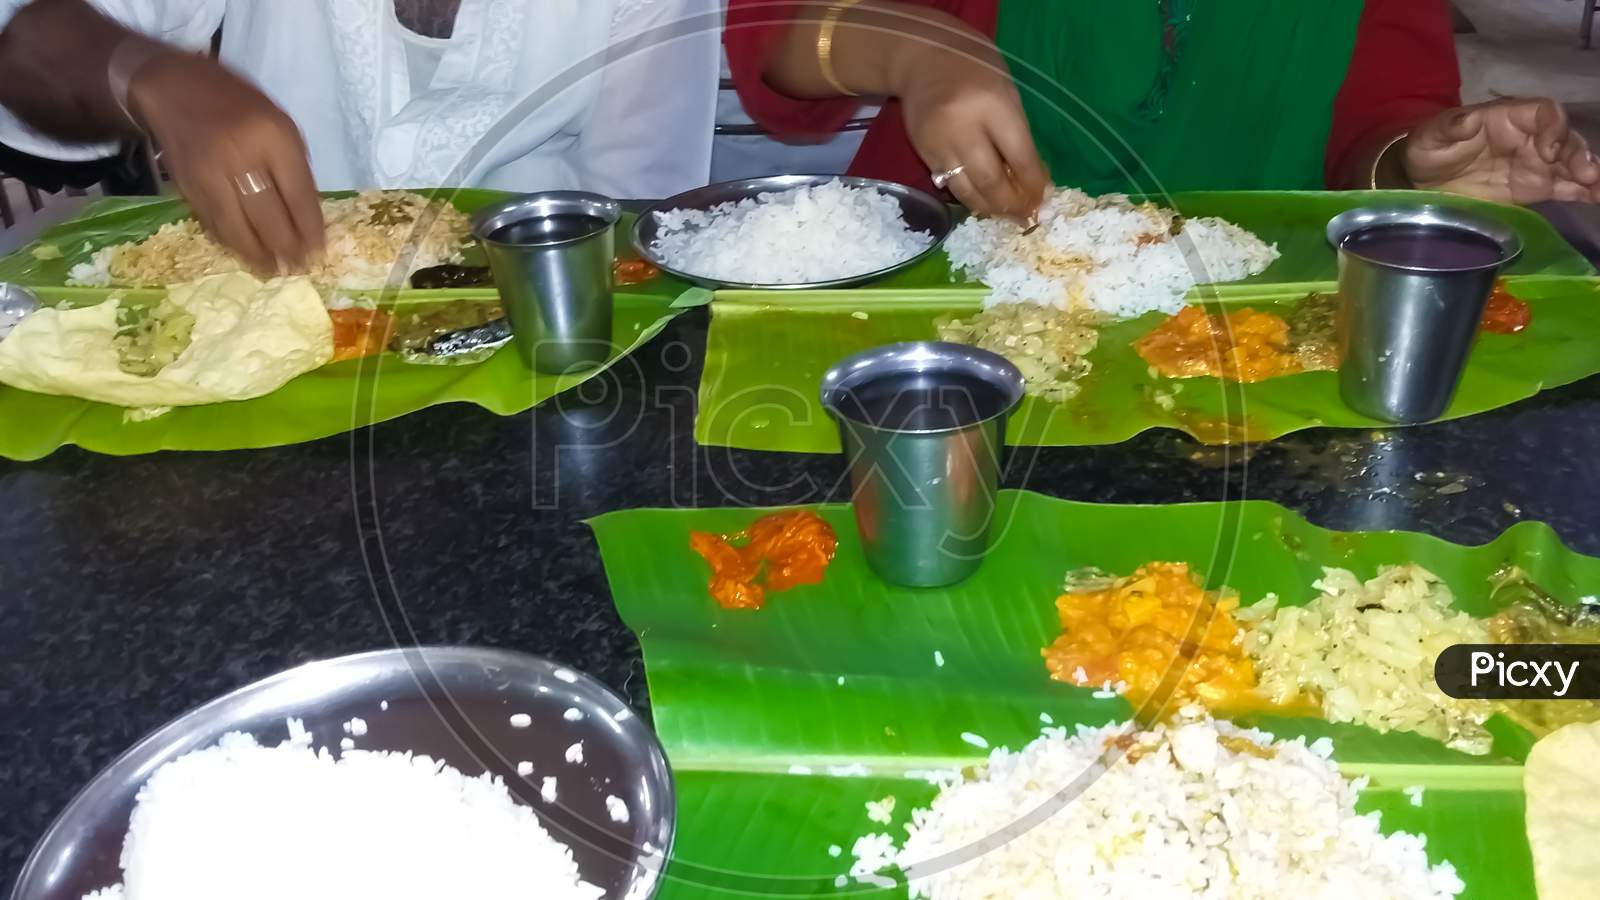 South Indian local food Rice and curry on banana leaves